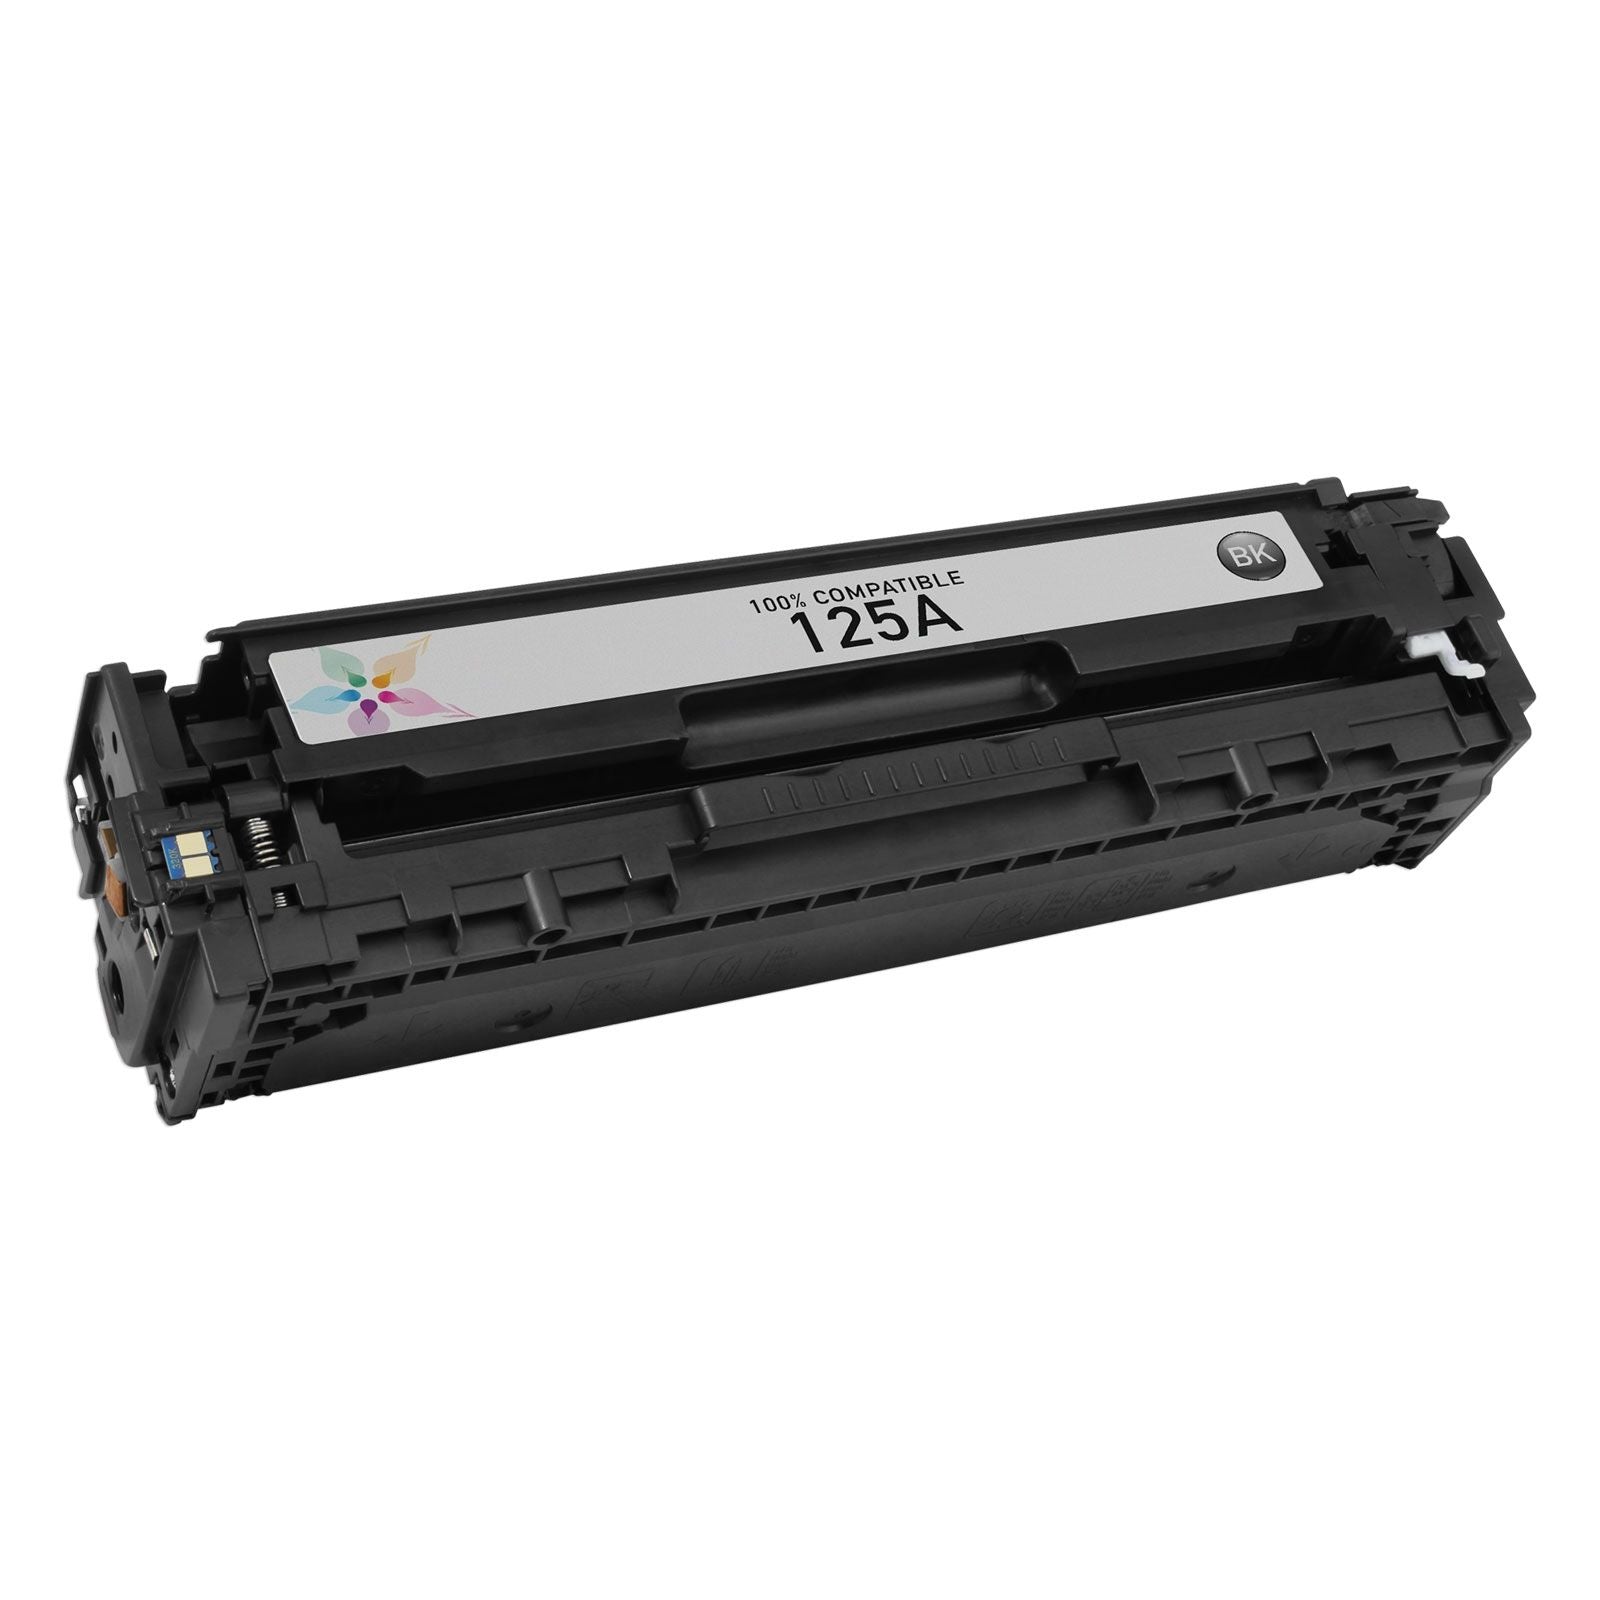 IMPERIAL BRAND Compatible toner cartridge for HP 125A BLACK LASER TONER 2200 PAGES